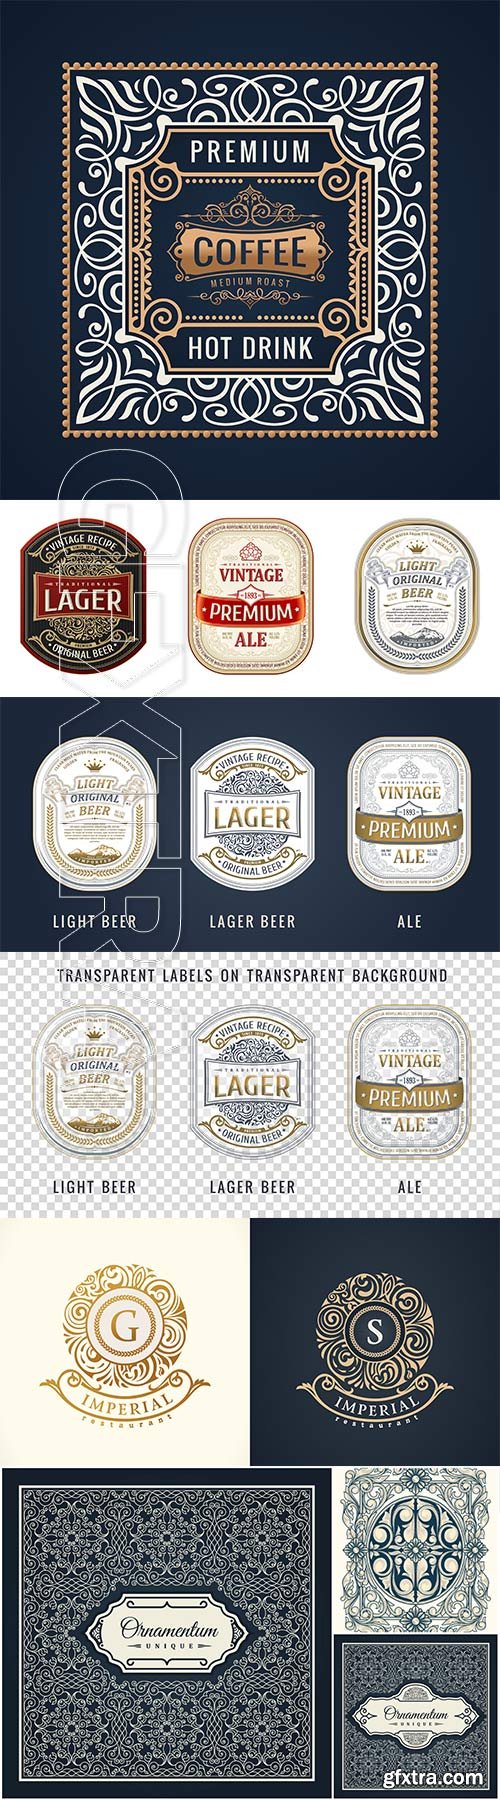 Vintage emblems and labels in vector